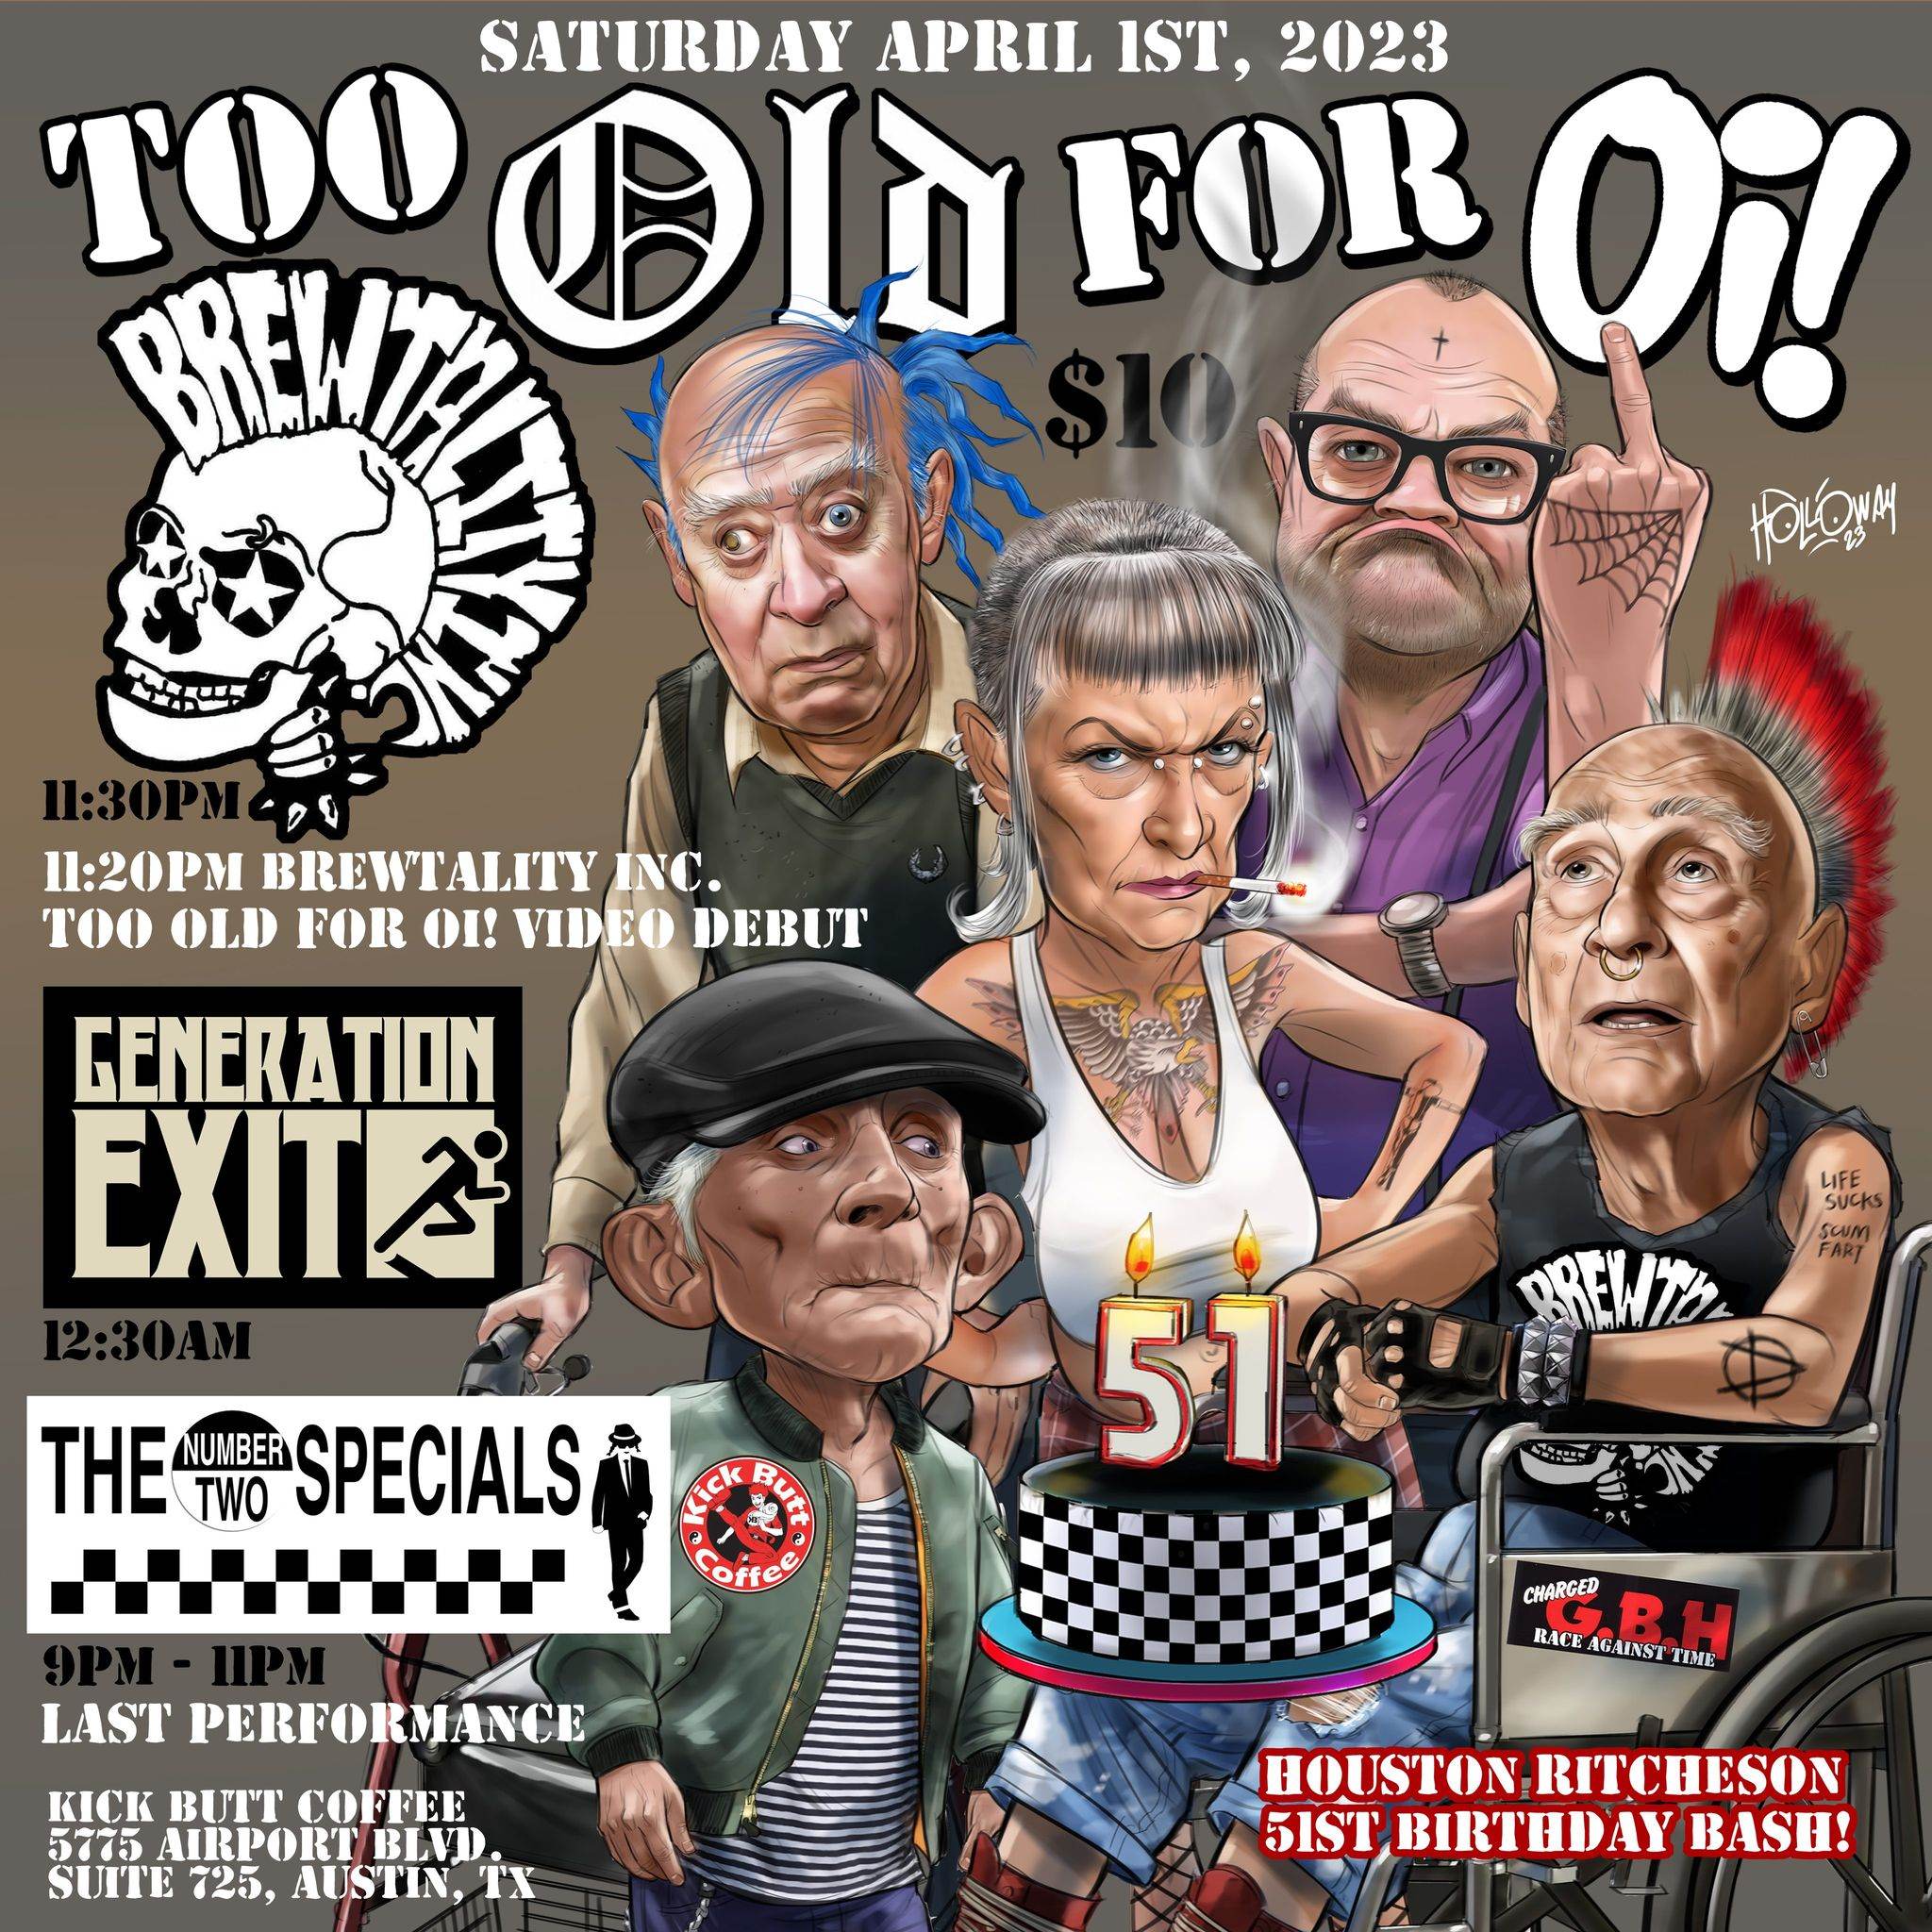 Too Old For Oi! w/ Brewtality Inc., Generation Exit, The Number Two Specials